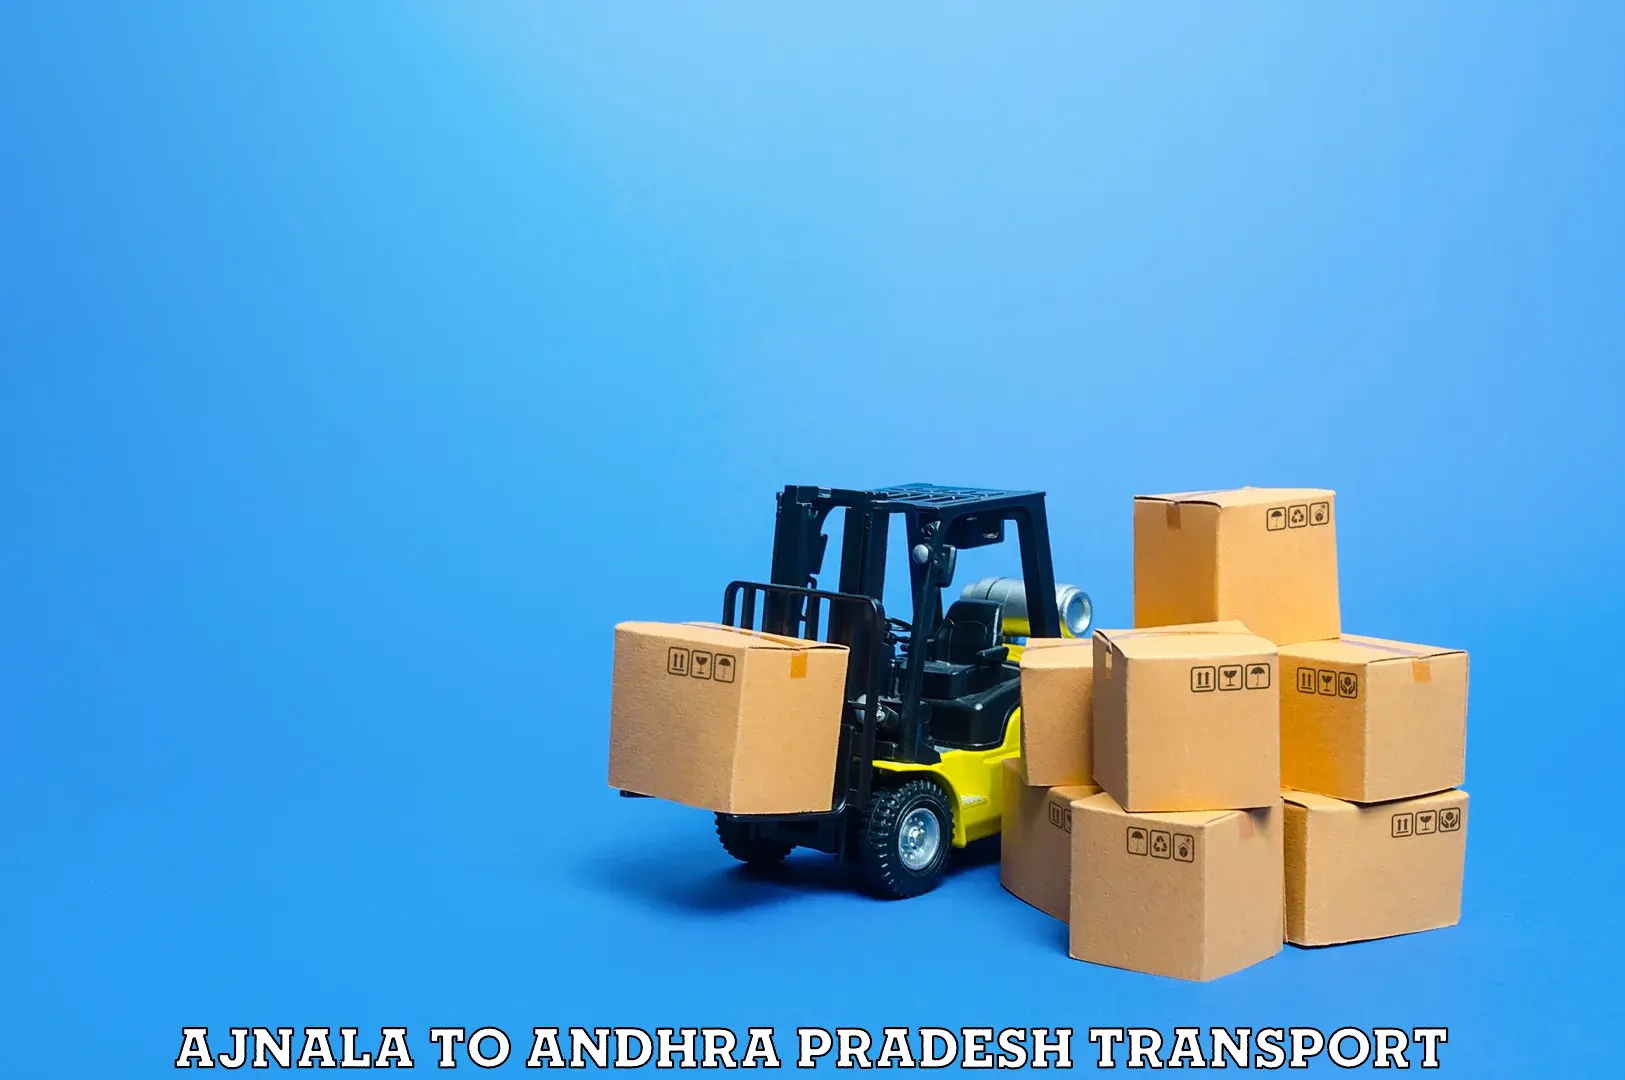 Package delivery services in Ajnala to B Kothakota